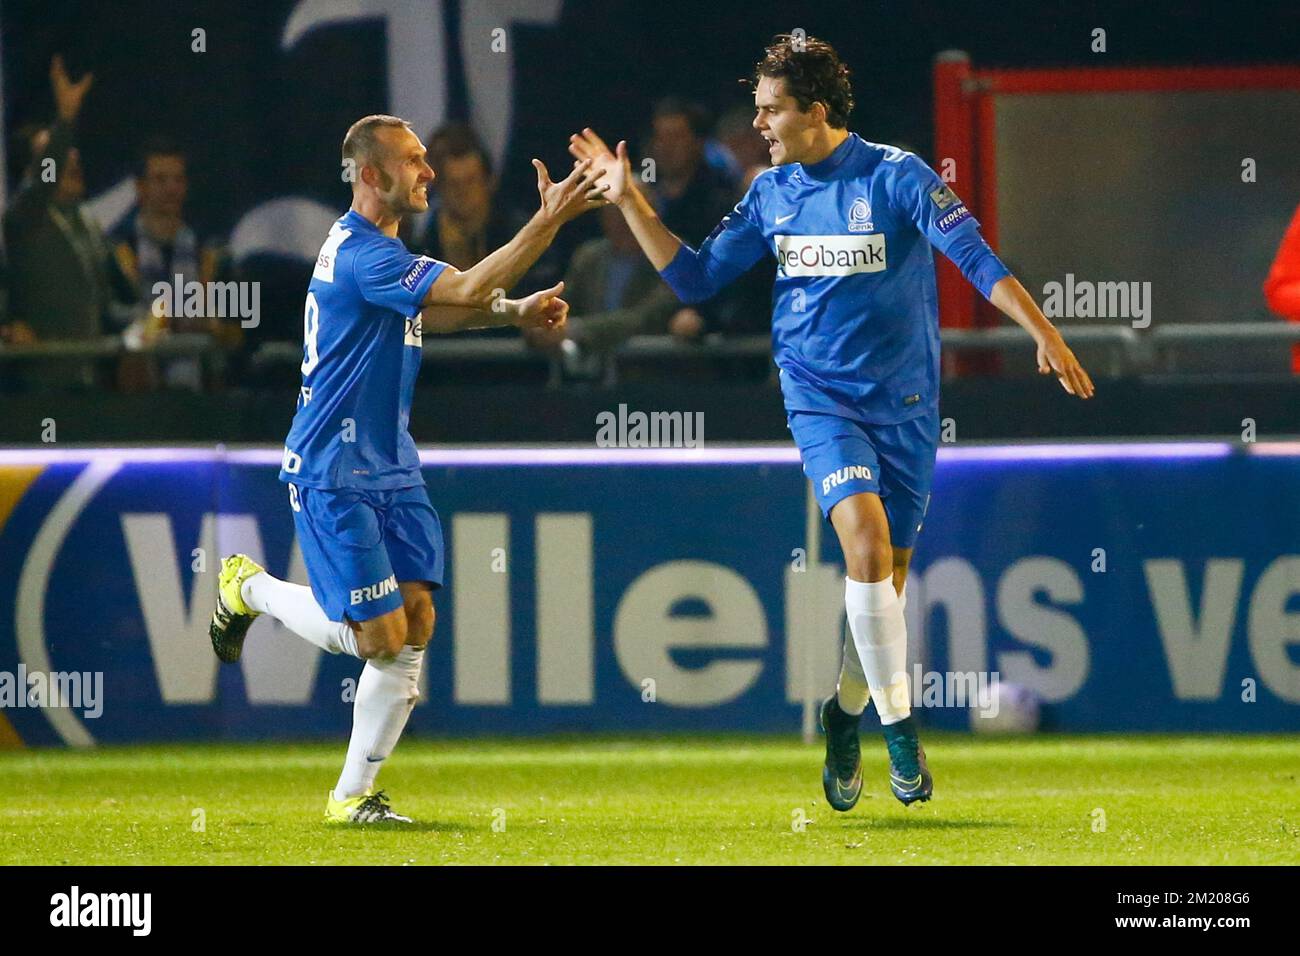 20151027 - OOSTENDE, BELGIUM: Genk's Thomas Buffel and Genk's Enes Unal celebrate after scoring during the Jupiler Pro League match between KV Oostende and RC Genk, in Oostende, Tuesday 27 October 2015, on day 13 of the Belgian soccer championship. BELGA PHOTO KURT DESPLENTER Stock Photo